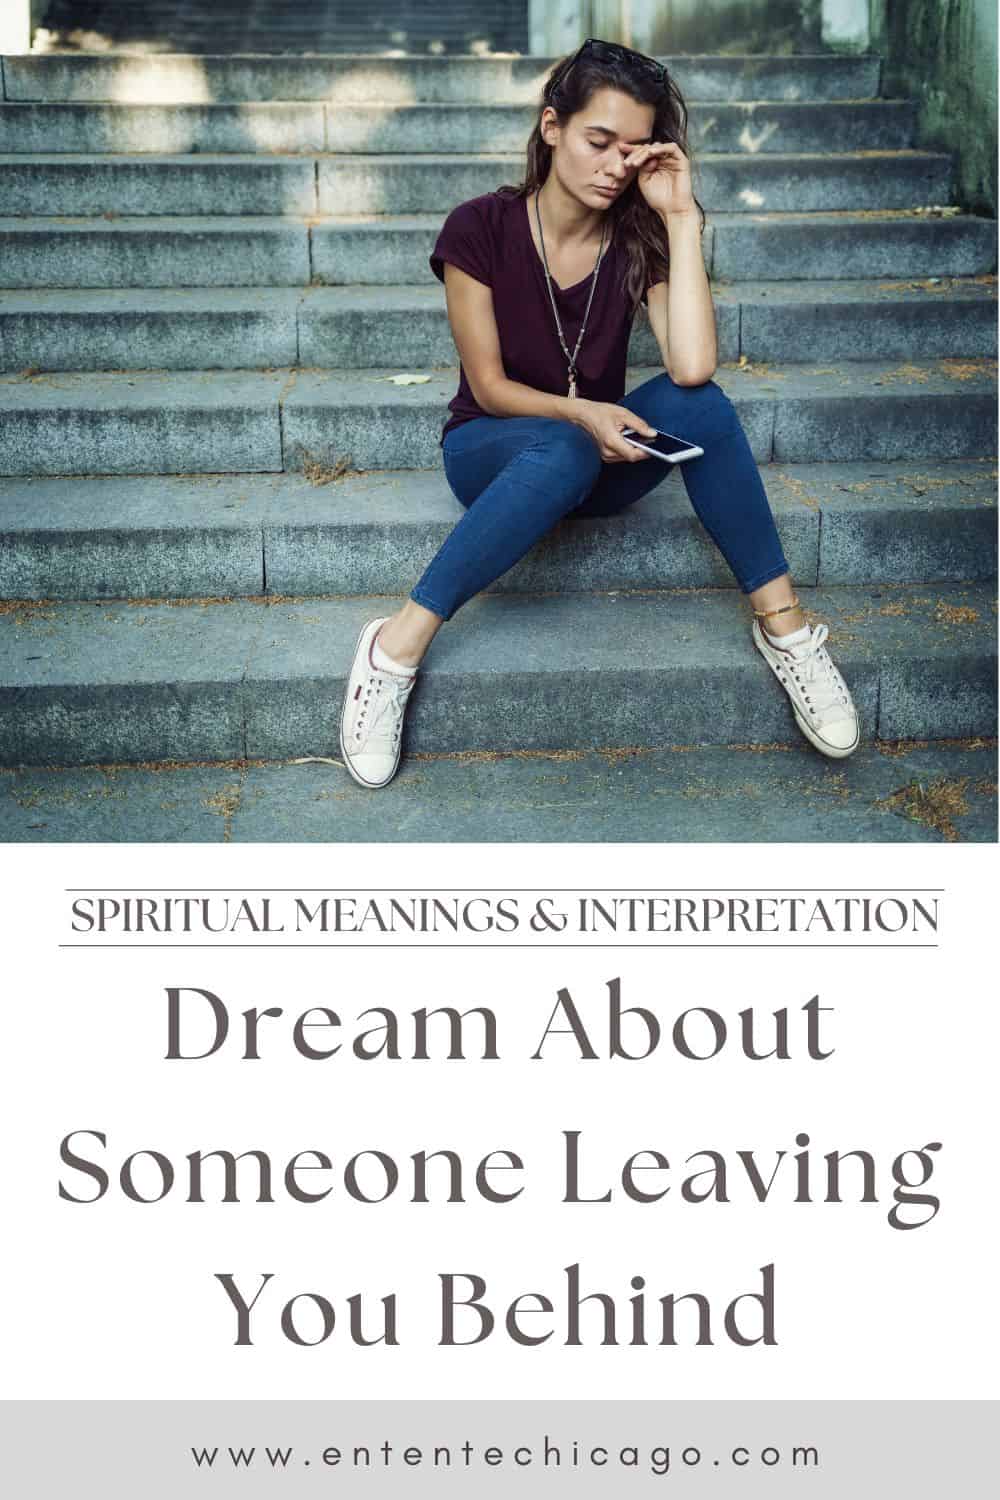 5 Meanings of Dreams About Someone Leaving You Behind